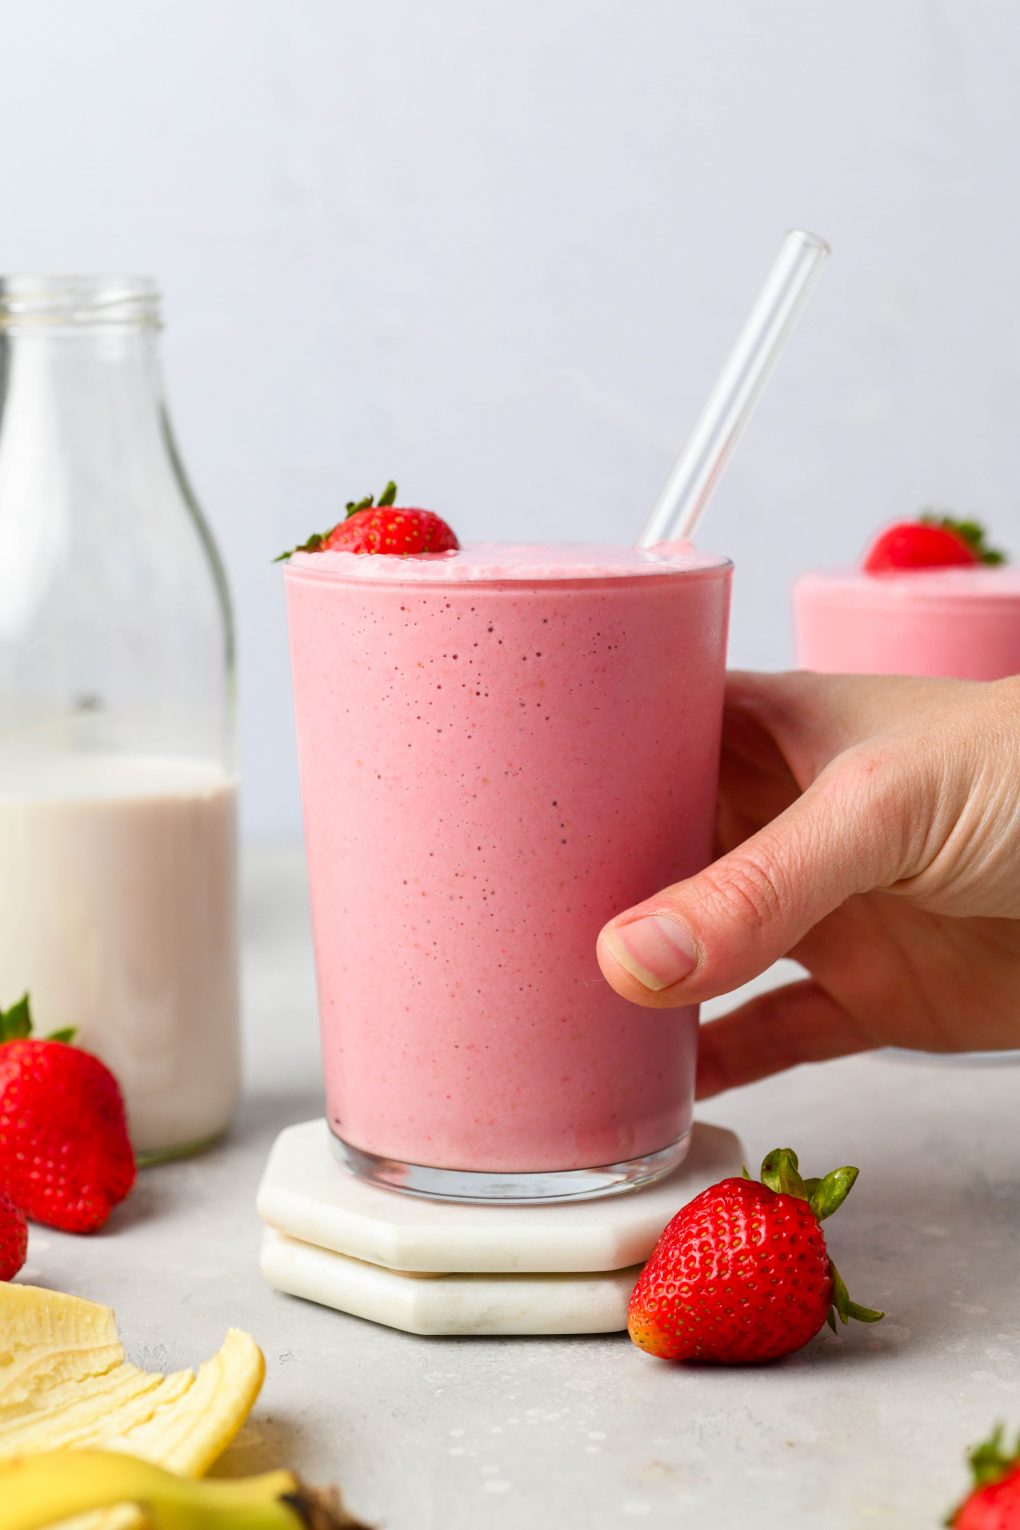 A hand reaching into the frame to grab a glass filled with a creamy strawberry banana smoothie. On a light background, next to some fresh strawberries and a glass jar of dairy free milk.